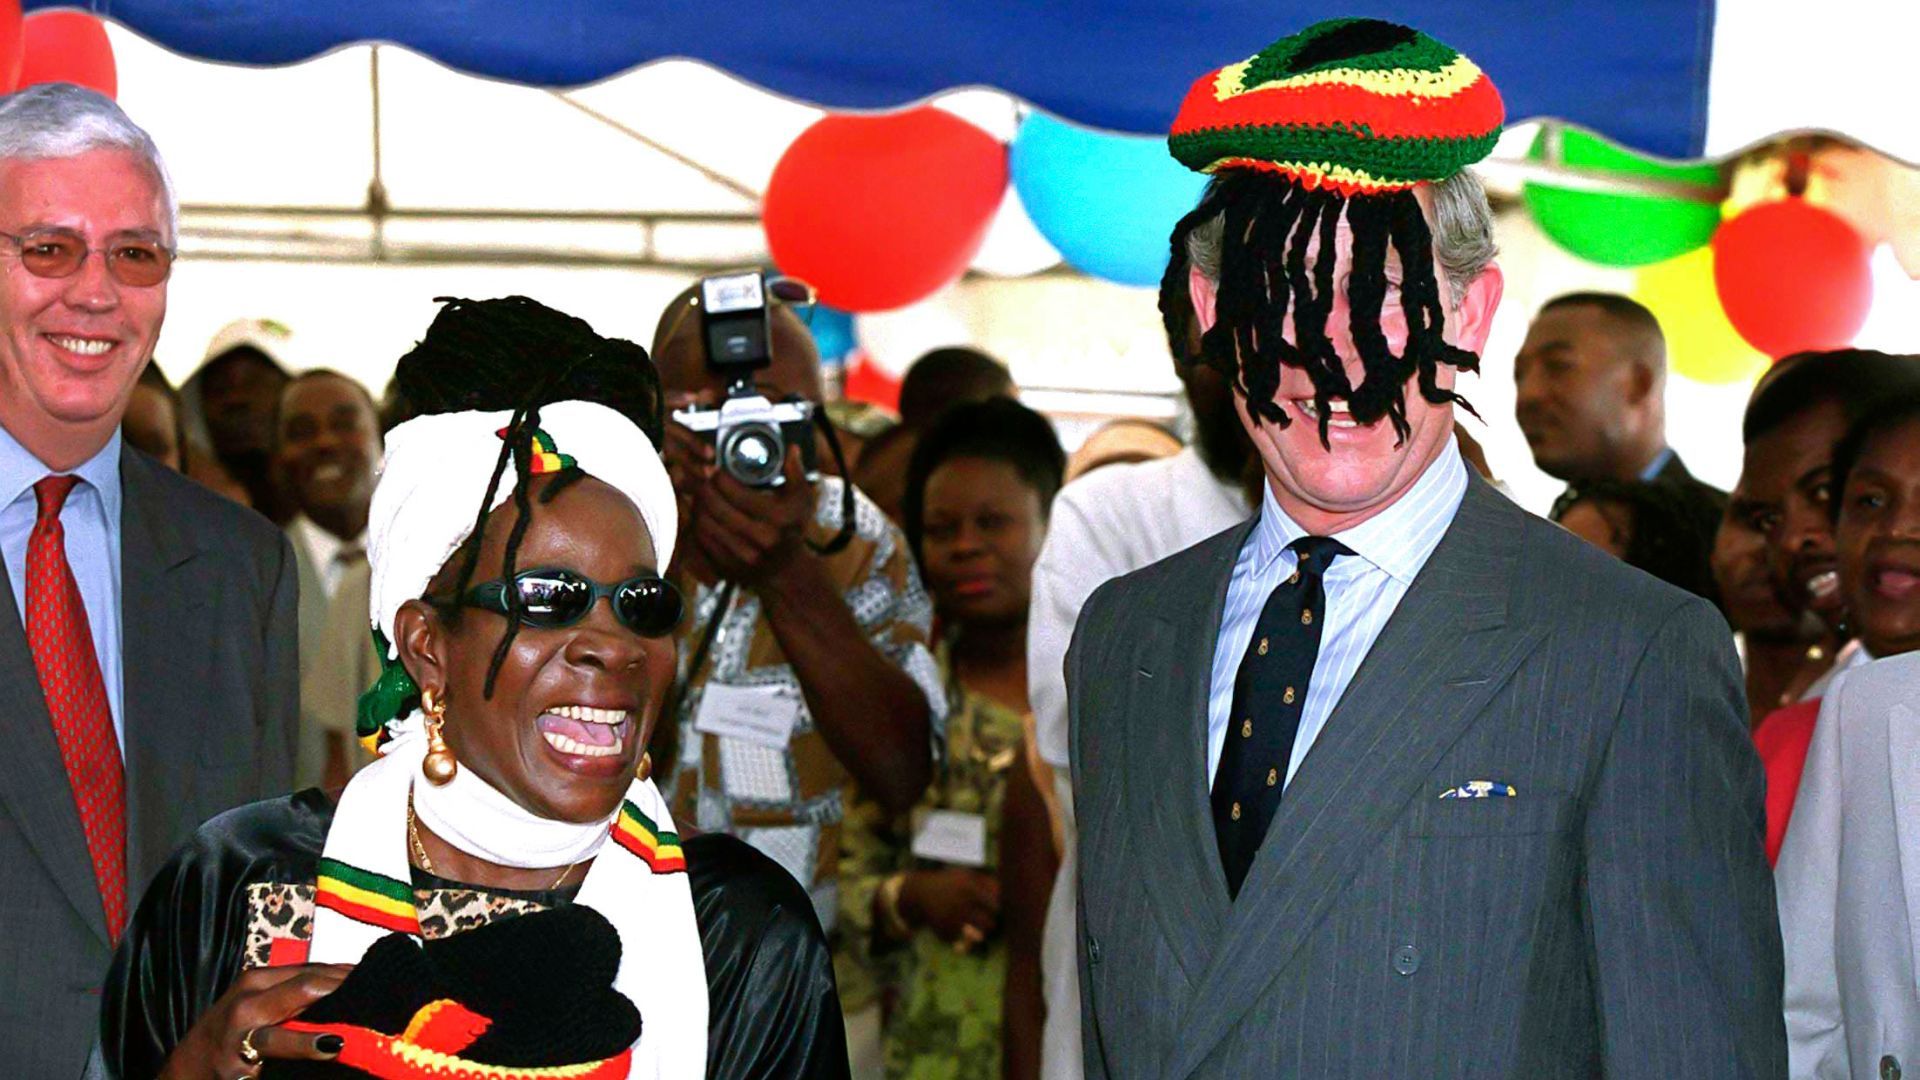 <p>                     No, that's not a permanent marker on the photo - just a minor fashion mishap. On his 2000 visit to Jamaica, Charles met the wife of the late Bob Marley, Rita Marley. While in Kingston, he was given a Rasta cap which he accidentally put on his head backwards covering his face. Both he and the crowd around him thought it very amusing.                   </p>